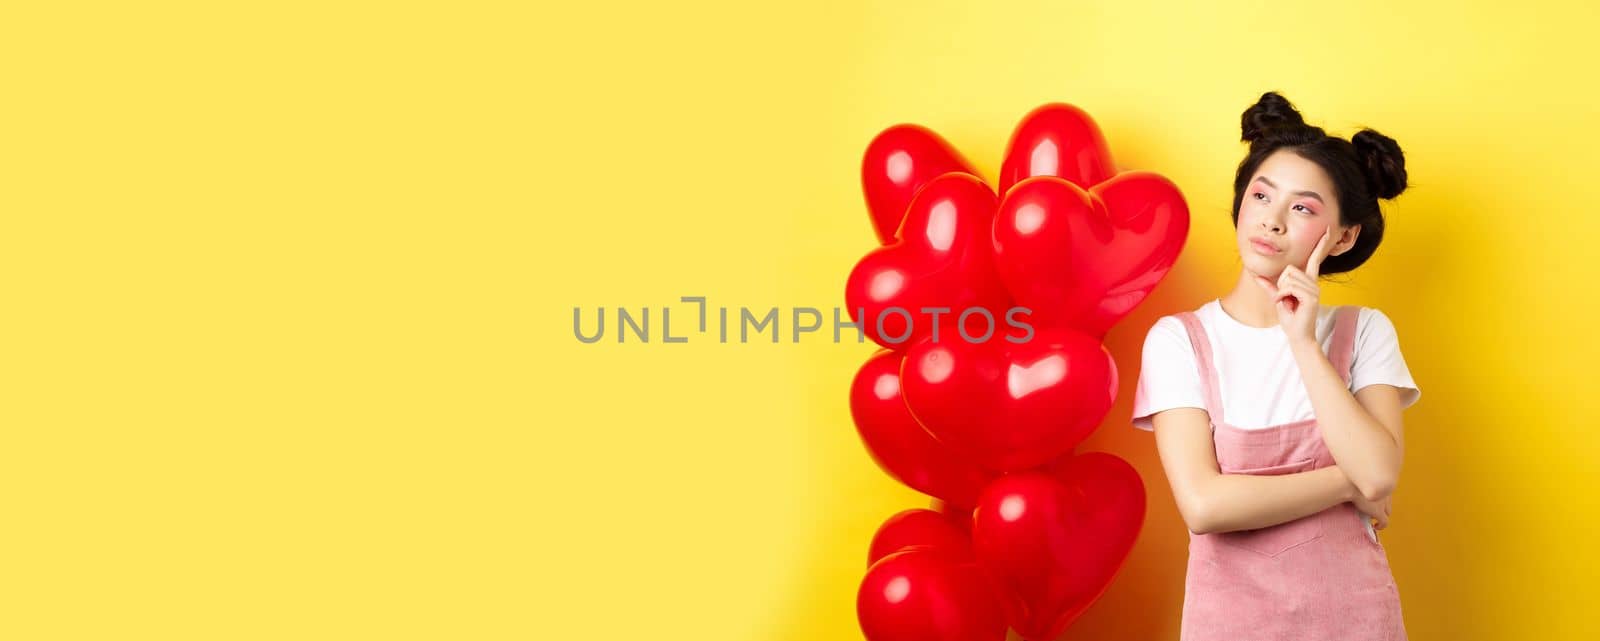 Valentines day concept. Pensive asian woman looking left, thinking about romantic date, standing near red hearts balloons on yellow background.